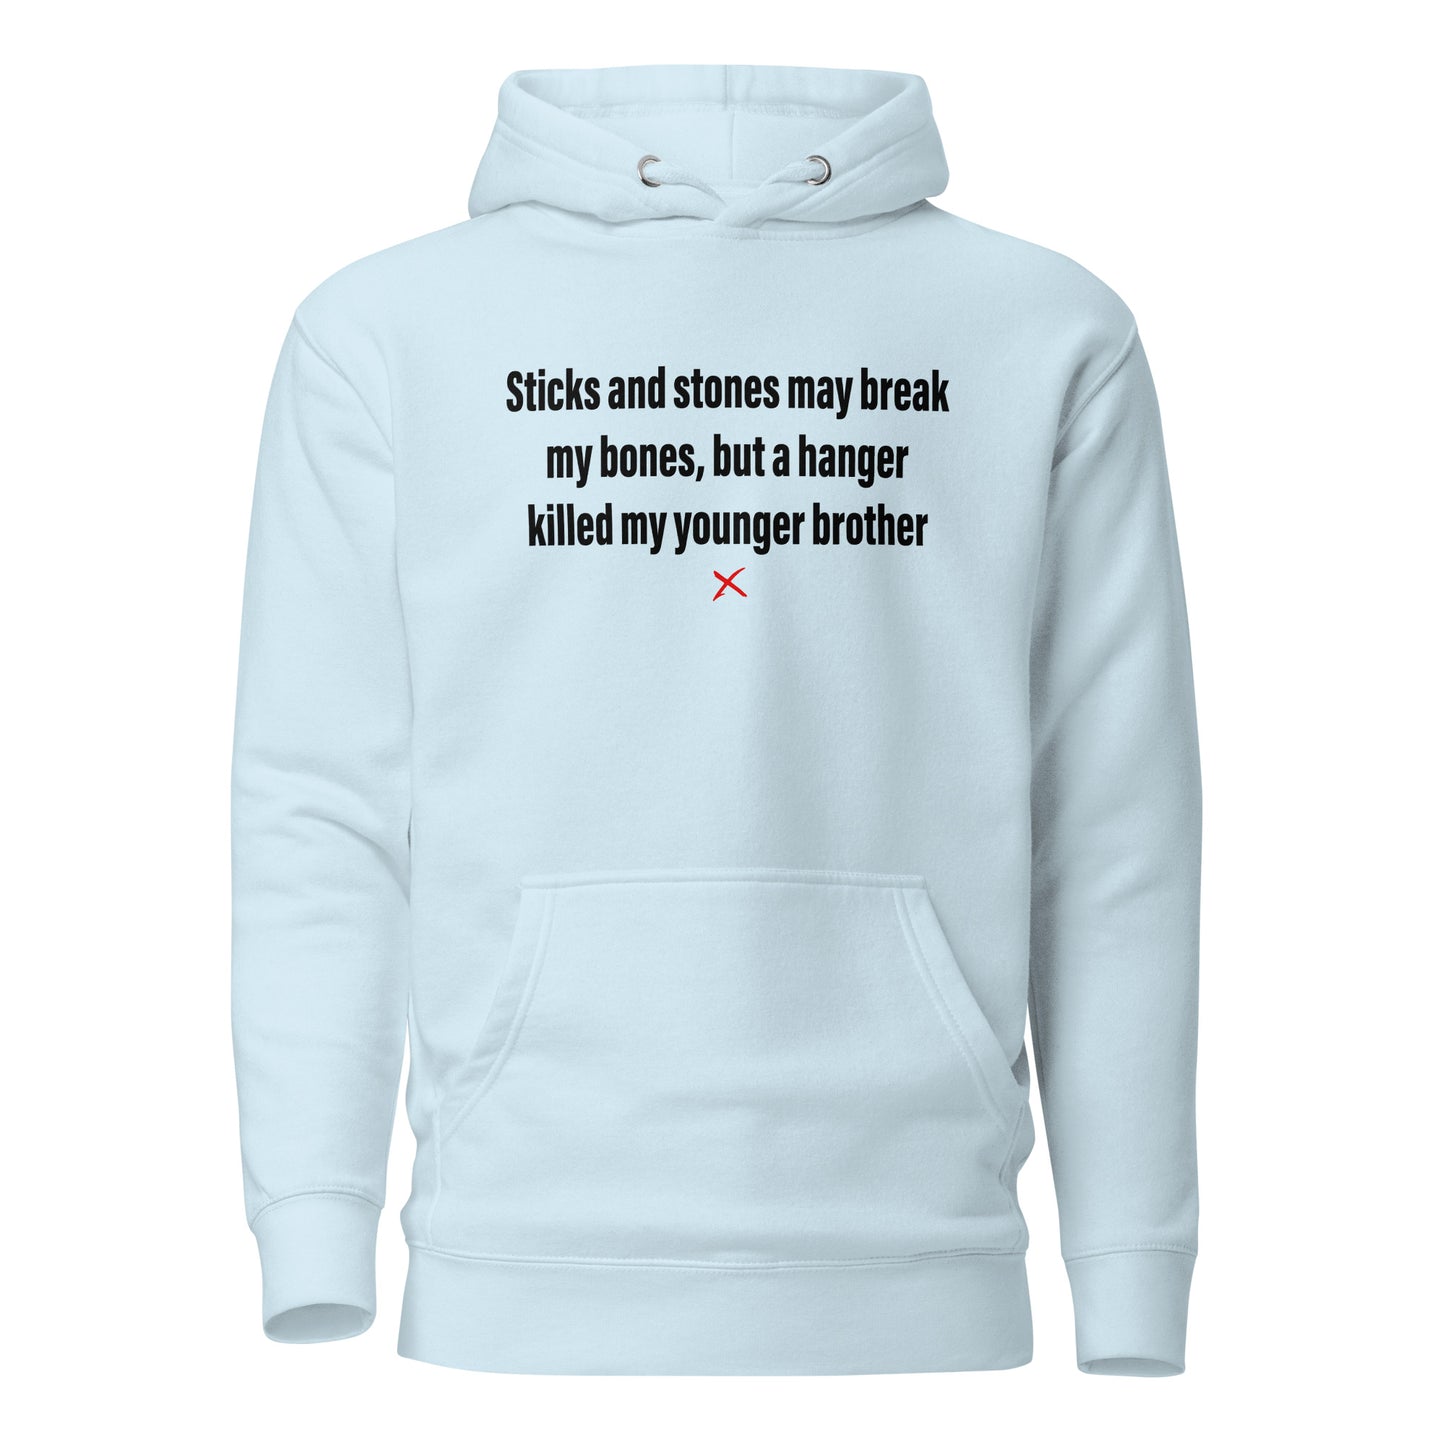 Sticks and stones may break my bones, but a hanger killed my younger brother - Hoodie